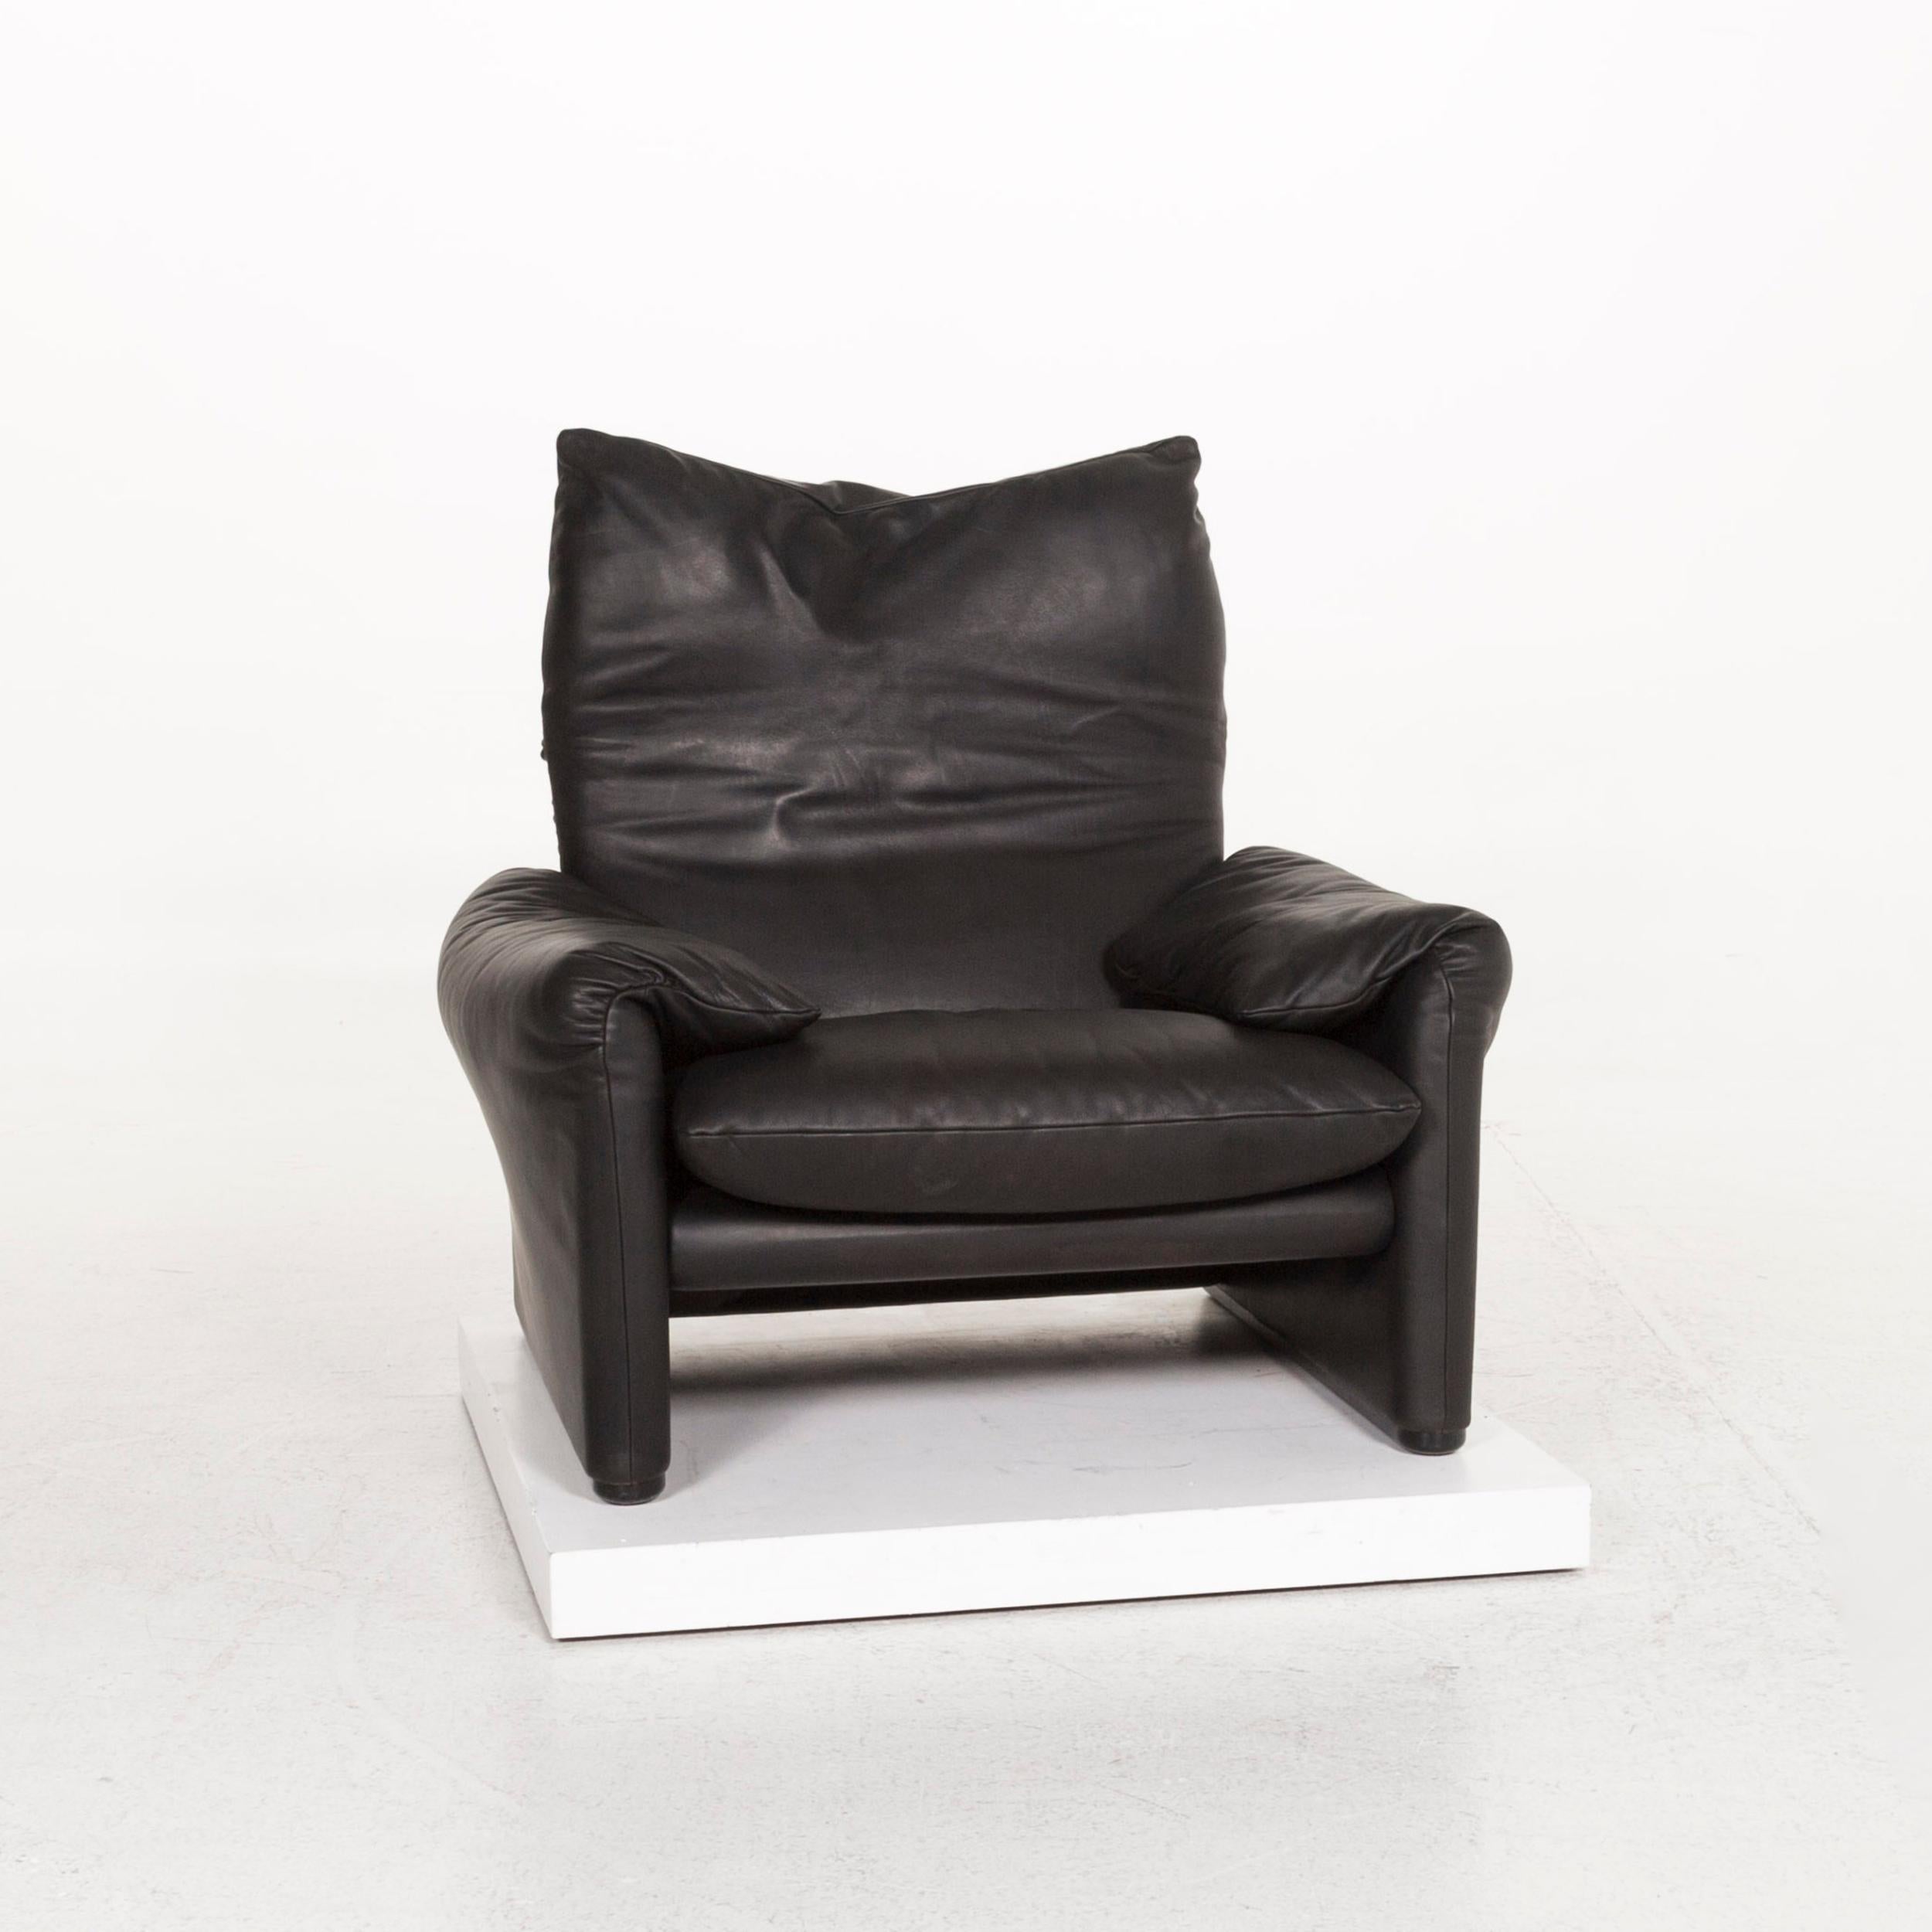 We bring to you a Cassina Maralunga leather armchair black function.
   
 

 Product measurements in centimeters:
 

Depth 83
Width 99
Height 70
Seat-height 41
Rest-height 52
Seat-depth 50
Seat-width 44
Back-height 28.